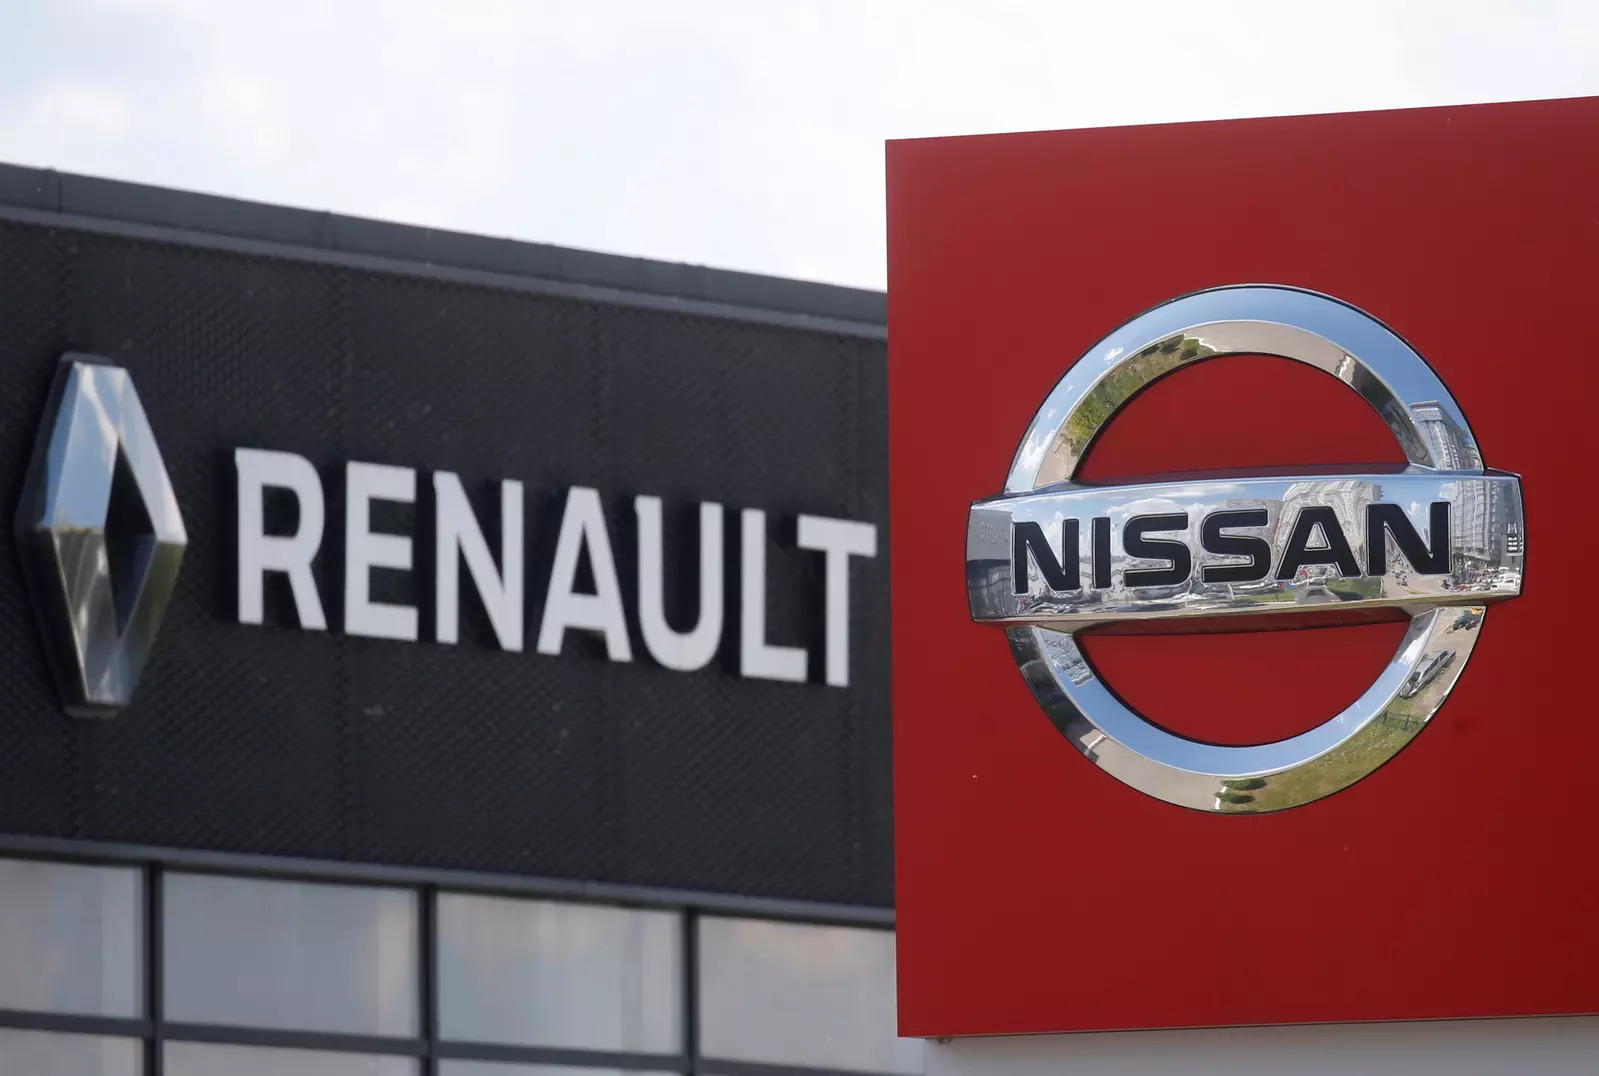 FILE PHOTO: The logos of car manufacturers Nissan and Renault are pictured at a dealership Kyiv, Ukraine June 25, 2020. REUTERS/Valentyn Ogirenko/File Photo